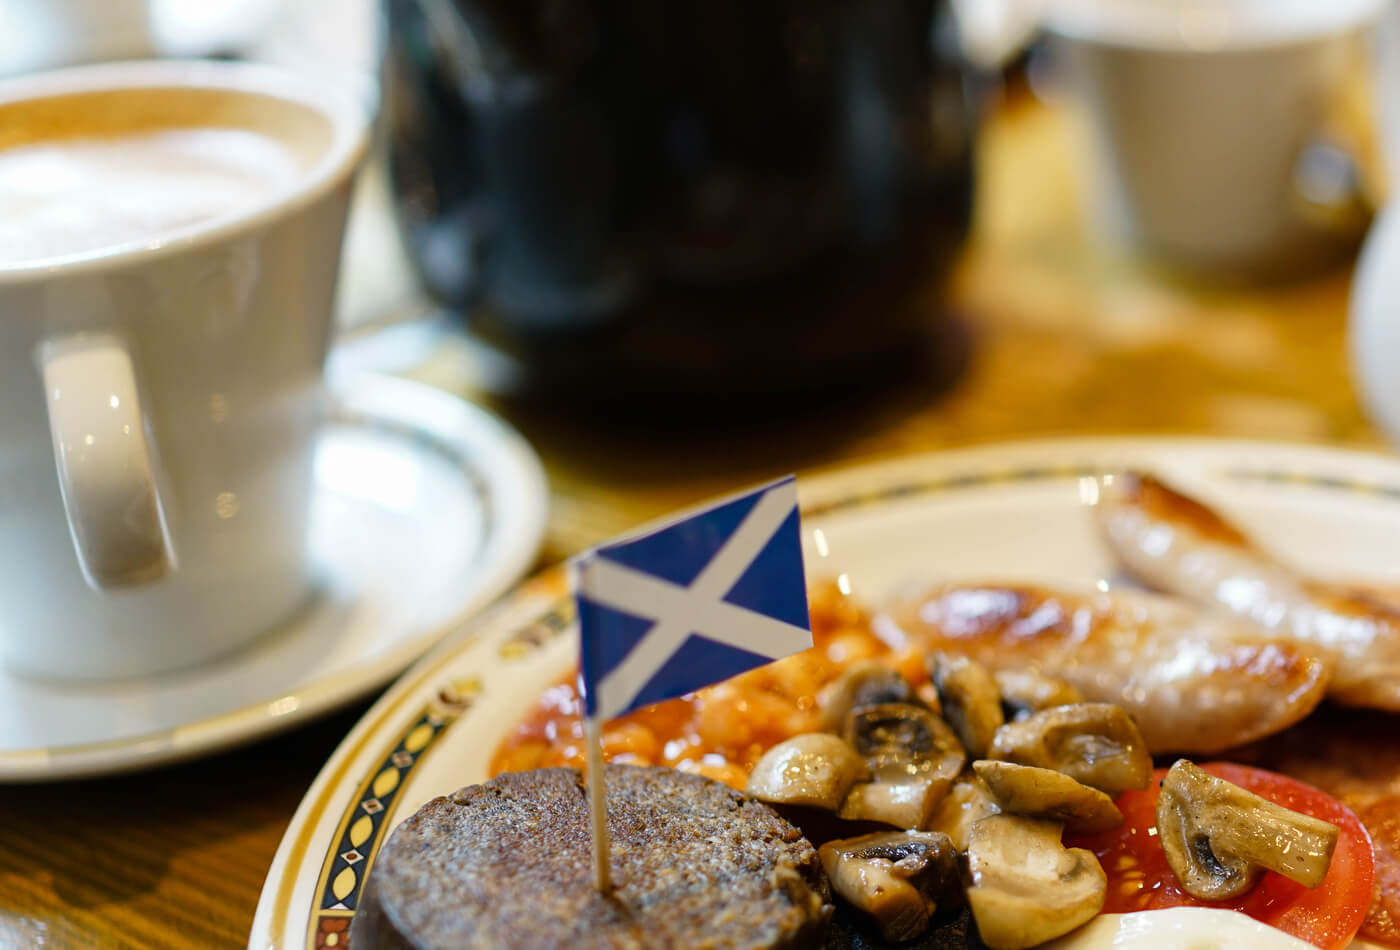 A fried breakfast with a Scottish flag in the black pudding